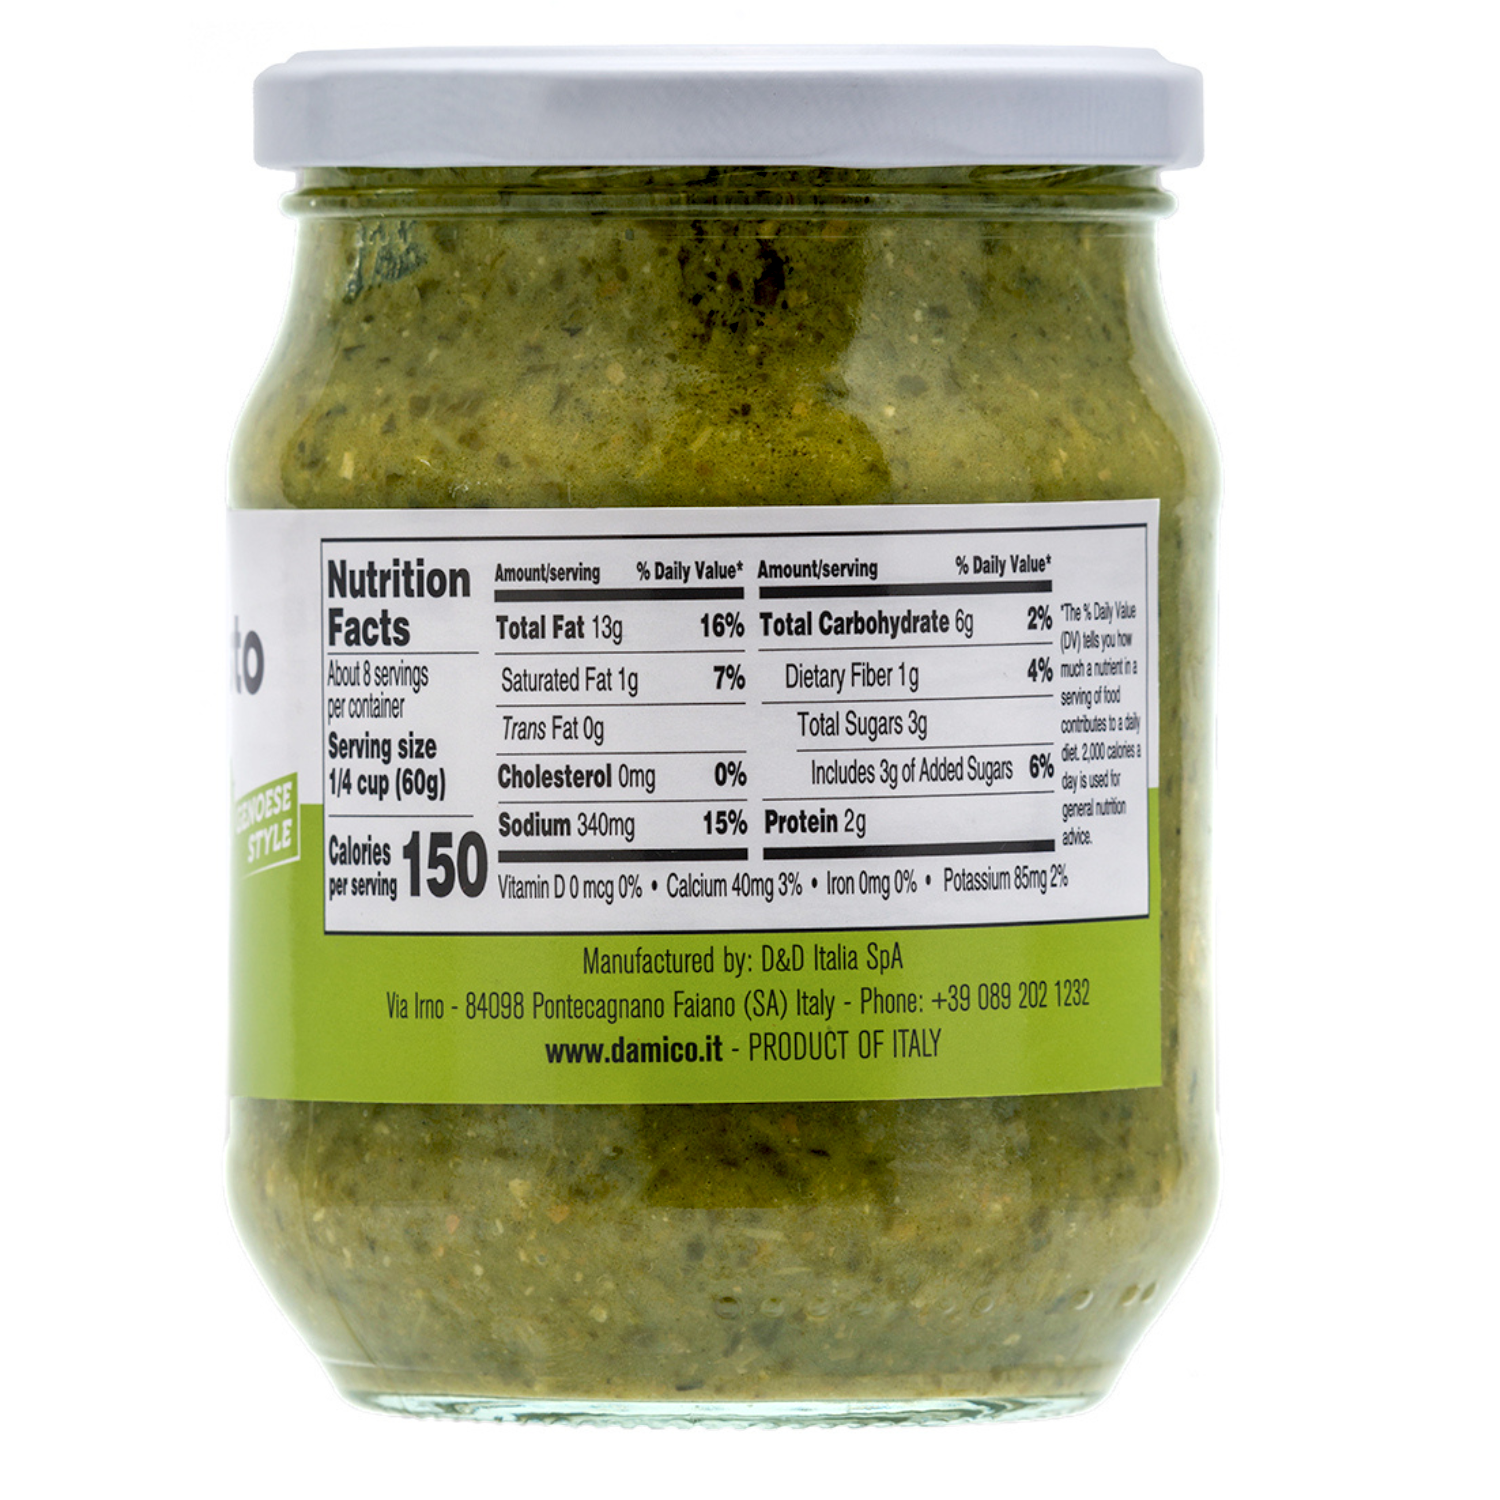 Pesto alla genovese - typical Italian pesto - simply use in pasta or as a bruschetta topping. - use it on your salmon dishes